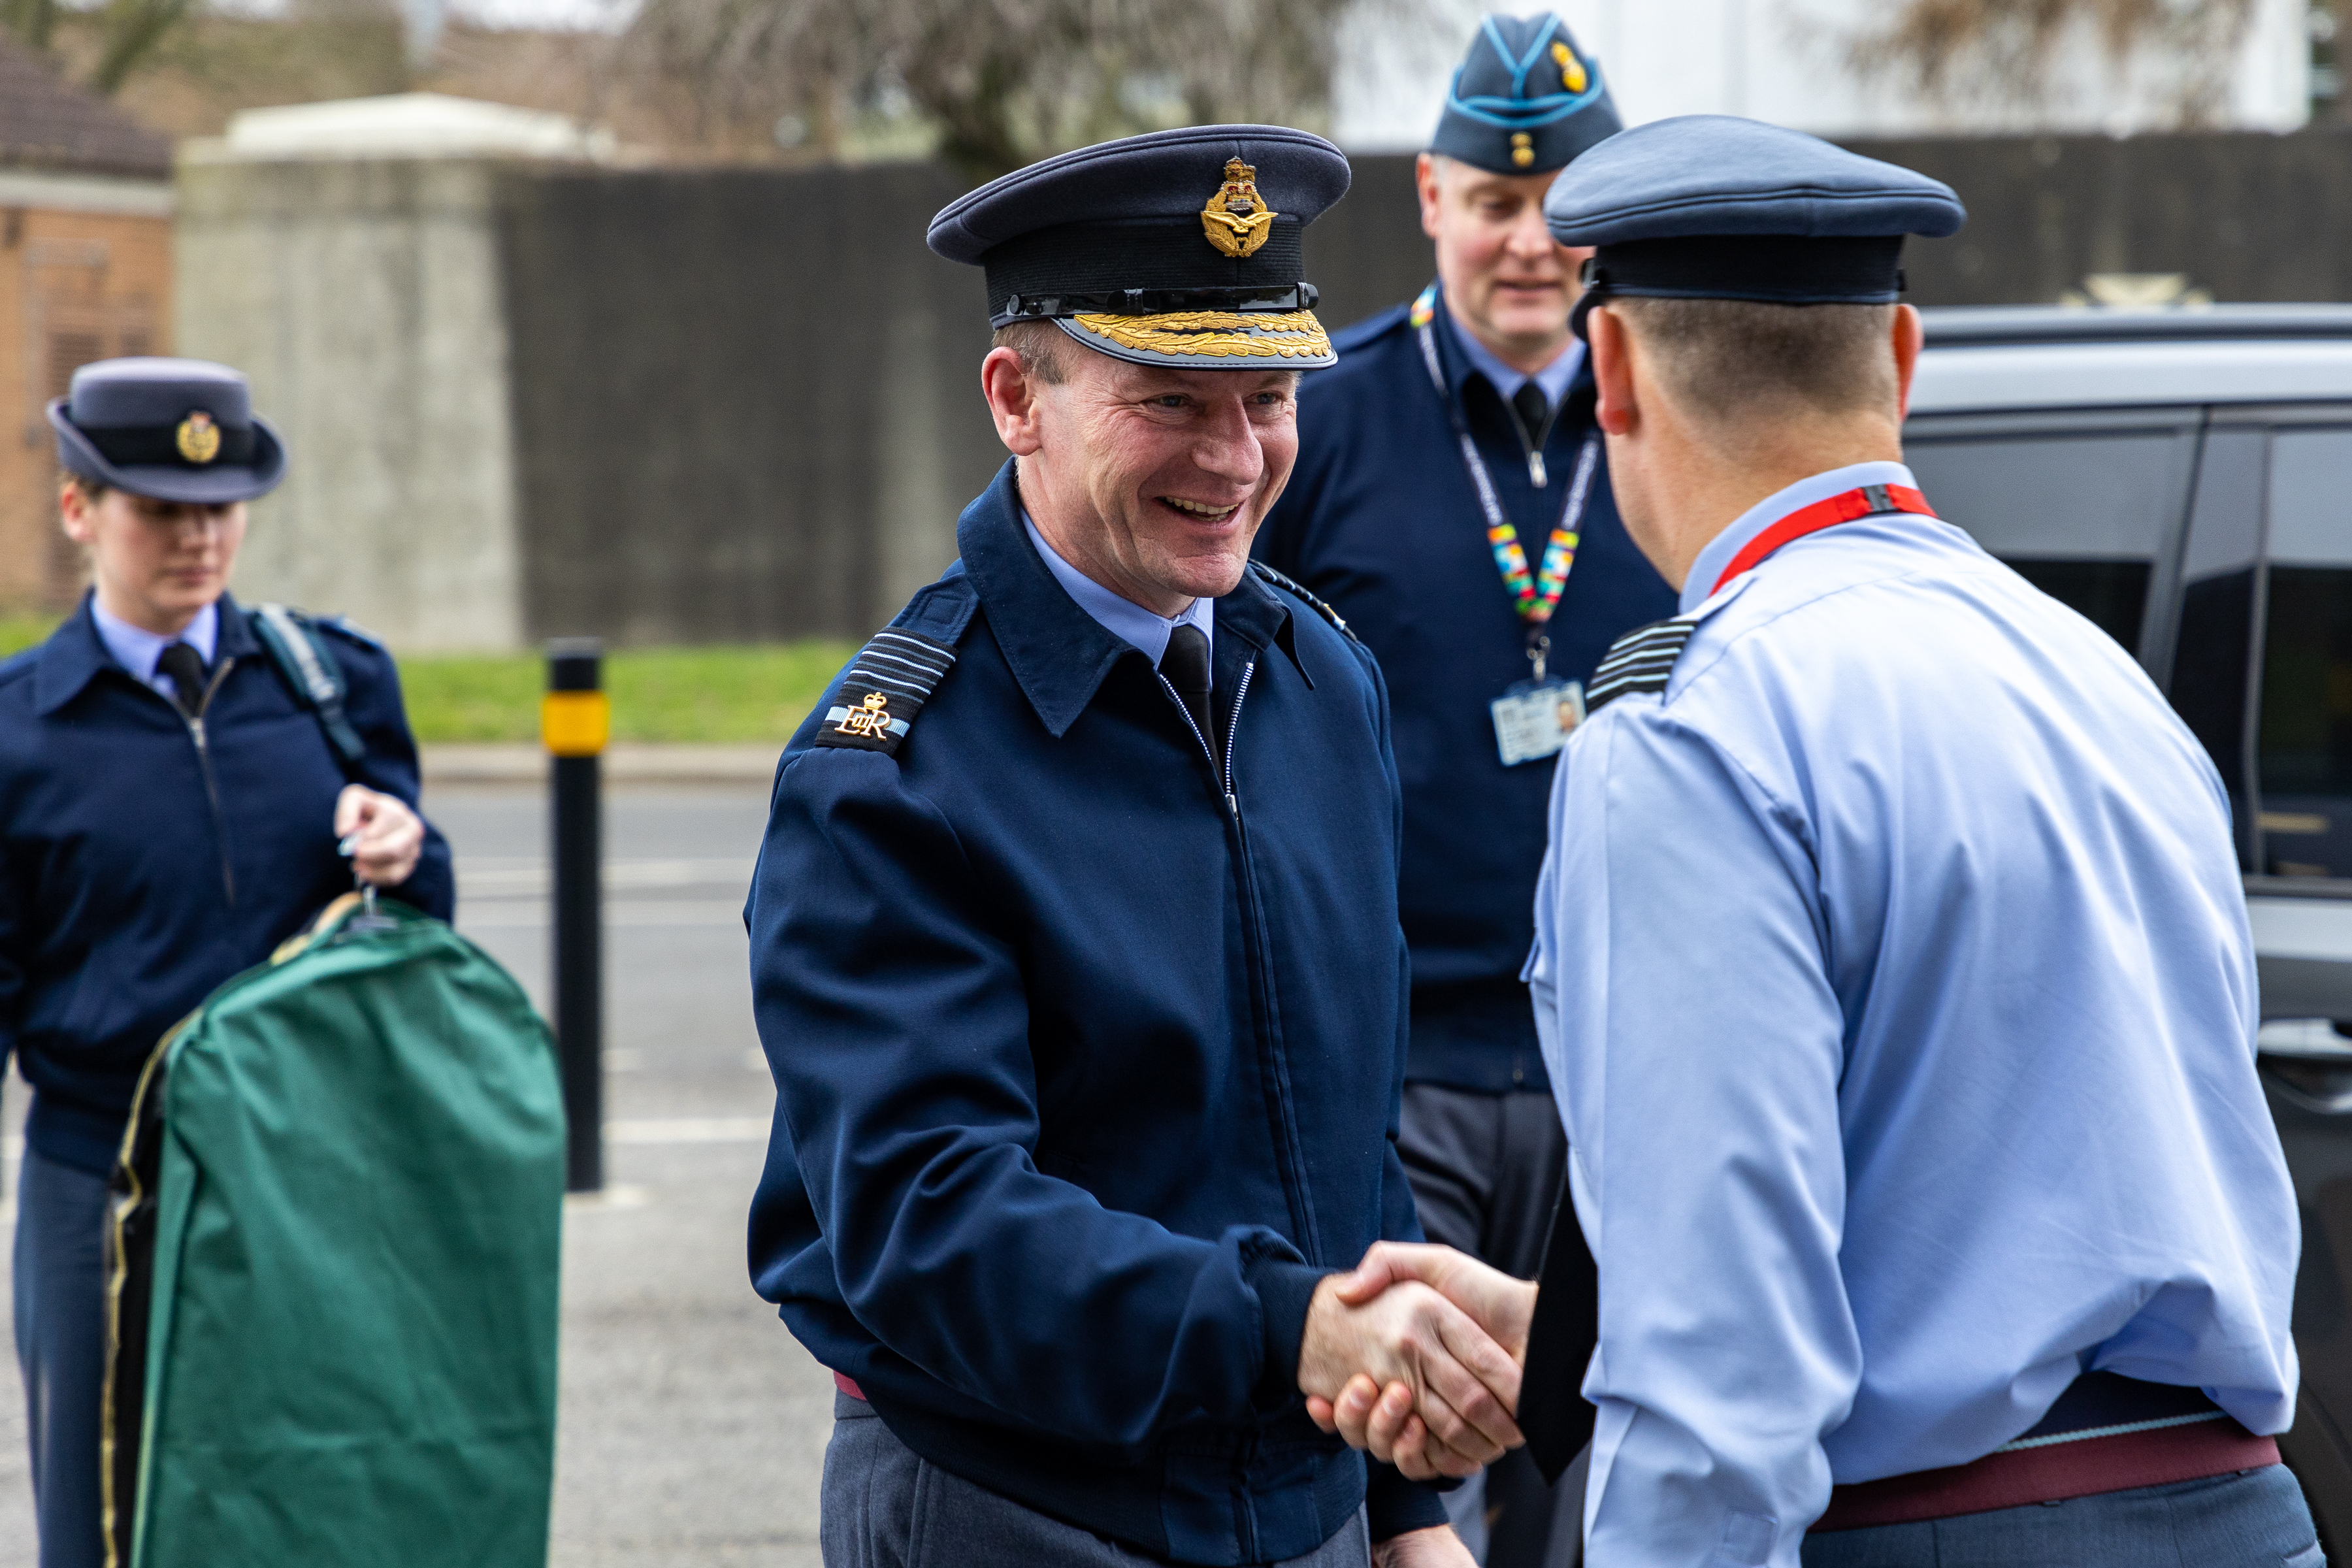 Image shows the Chief of the Air Staff and a RAF aviator shaking hands outside.